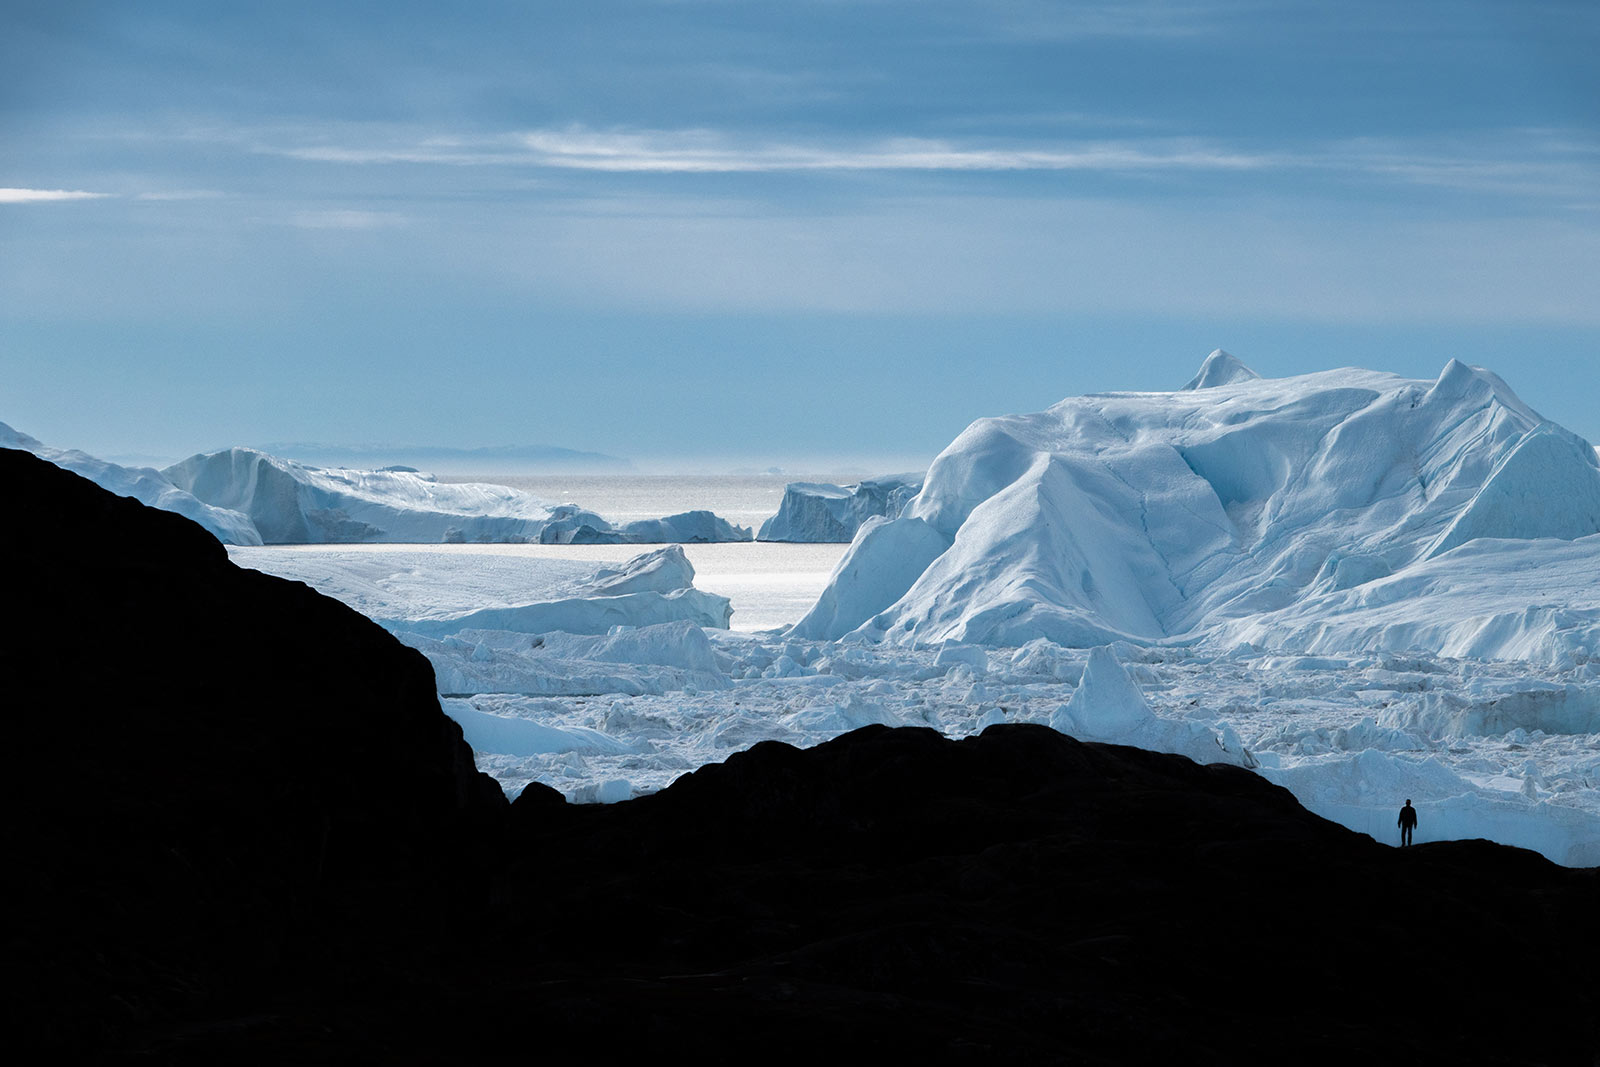 A vista of Greenland, home of the Aappaluttoq mine